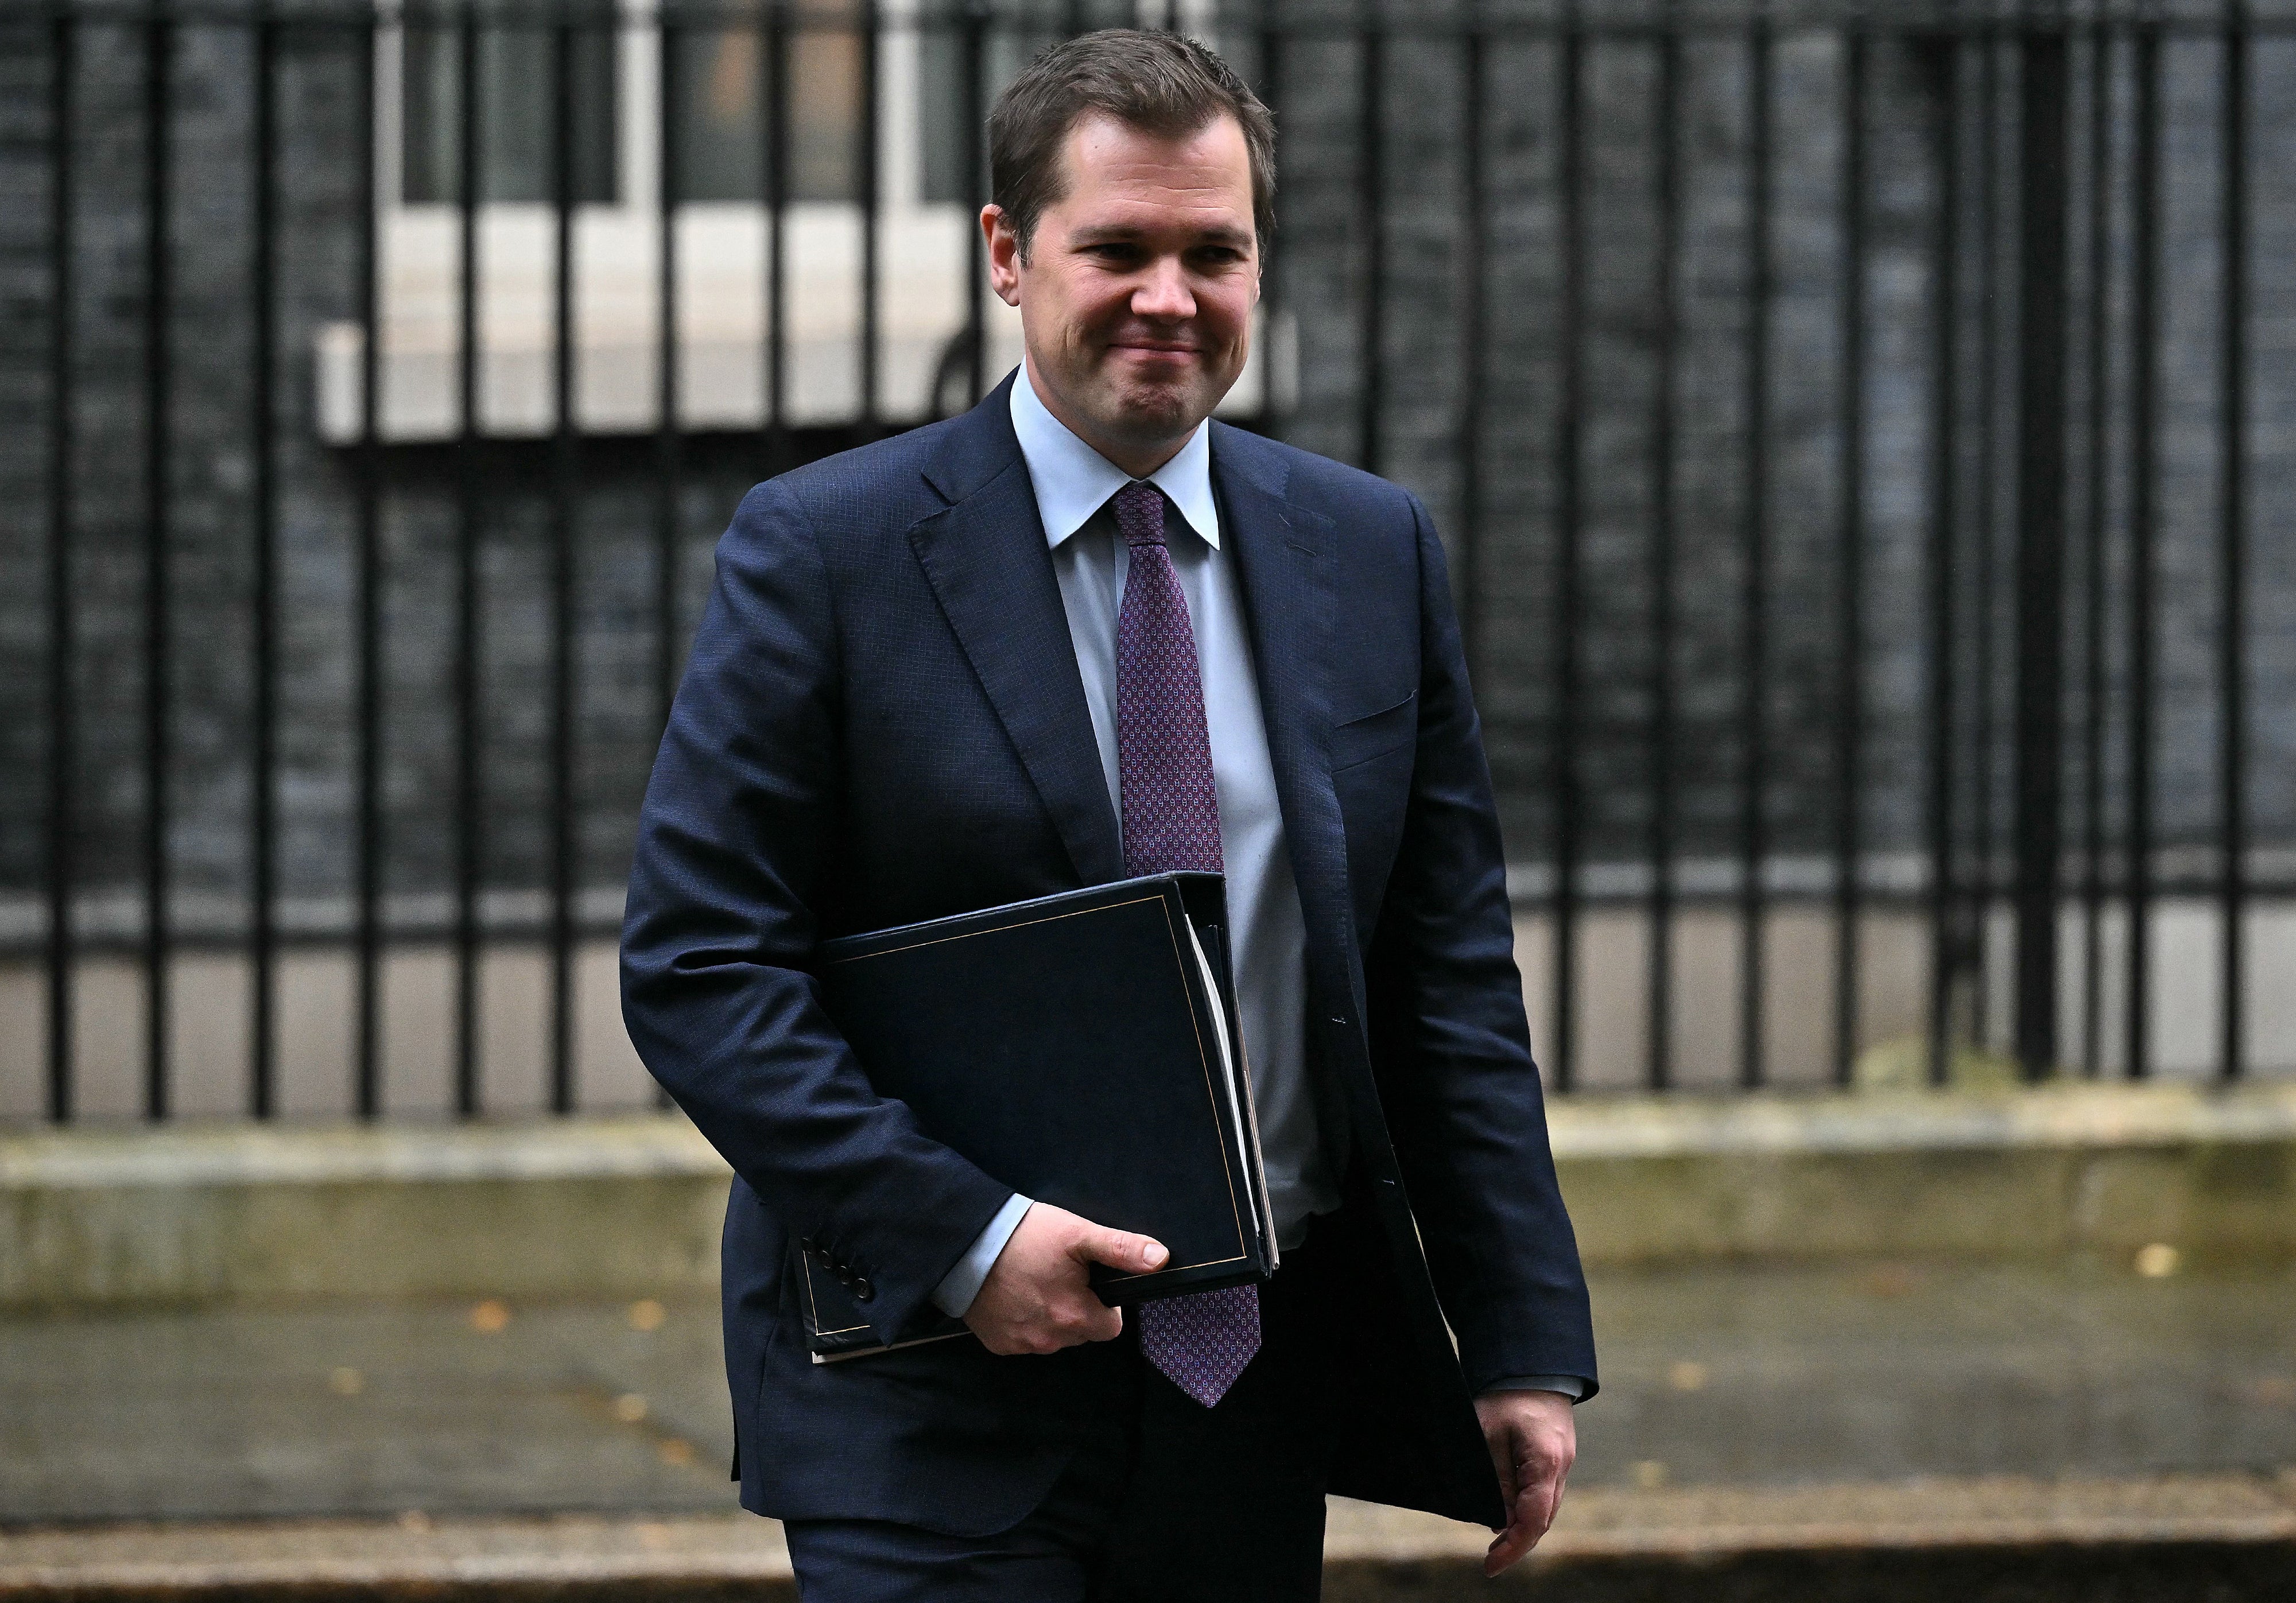 Robert Jenrick, who has quit as immigration minister, in Downing Street